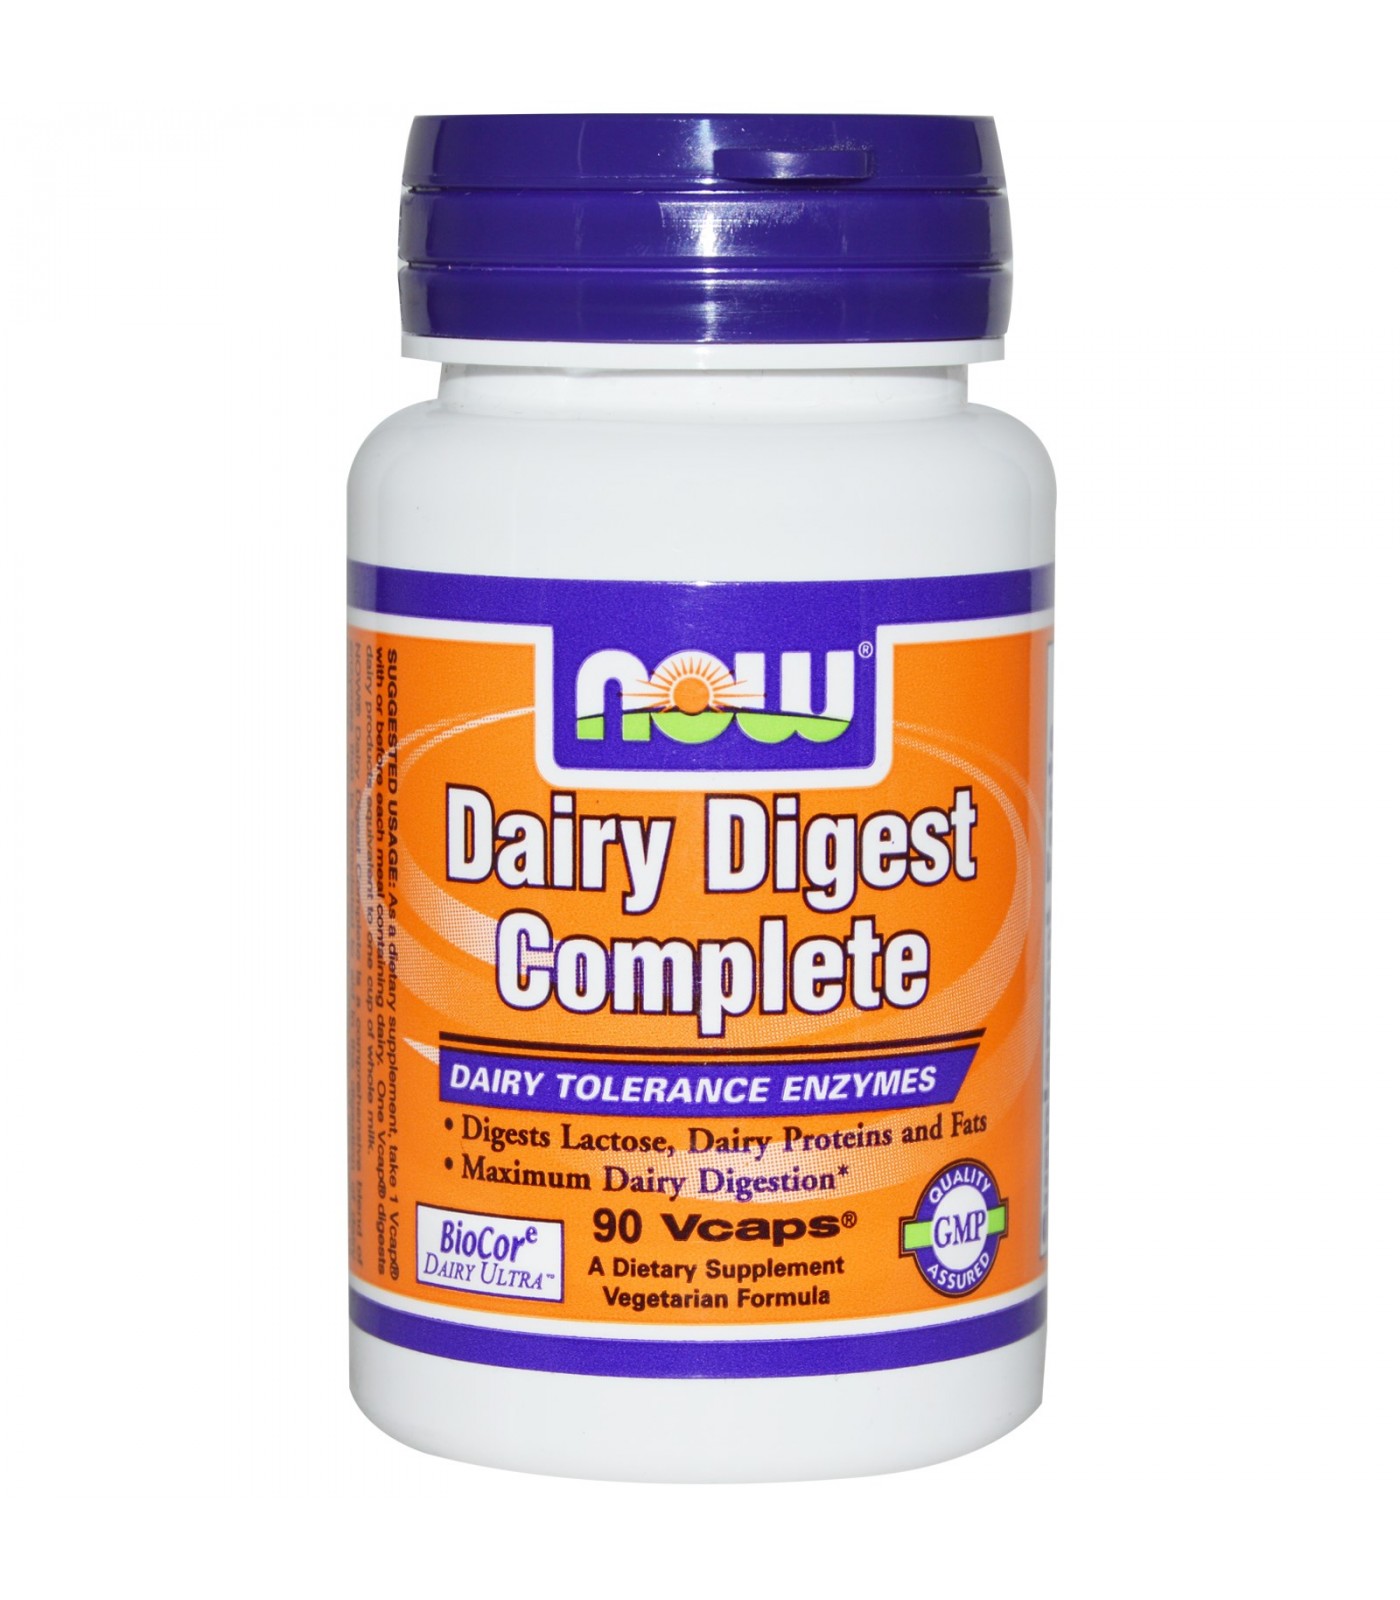 NOW - Dairy Digest Complete - 90 Vcaps®